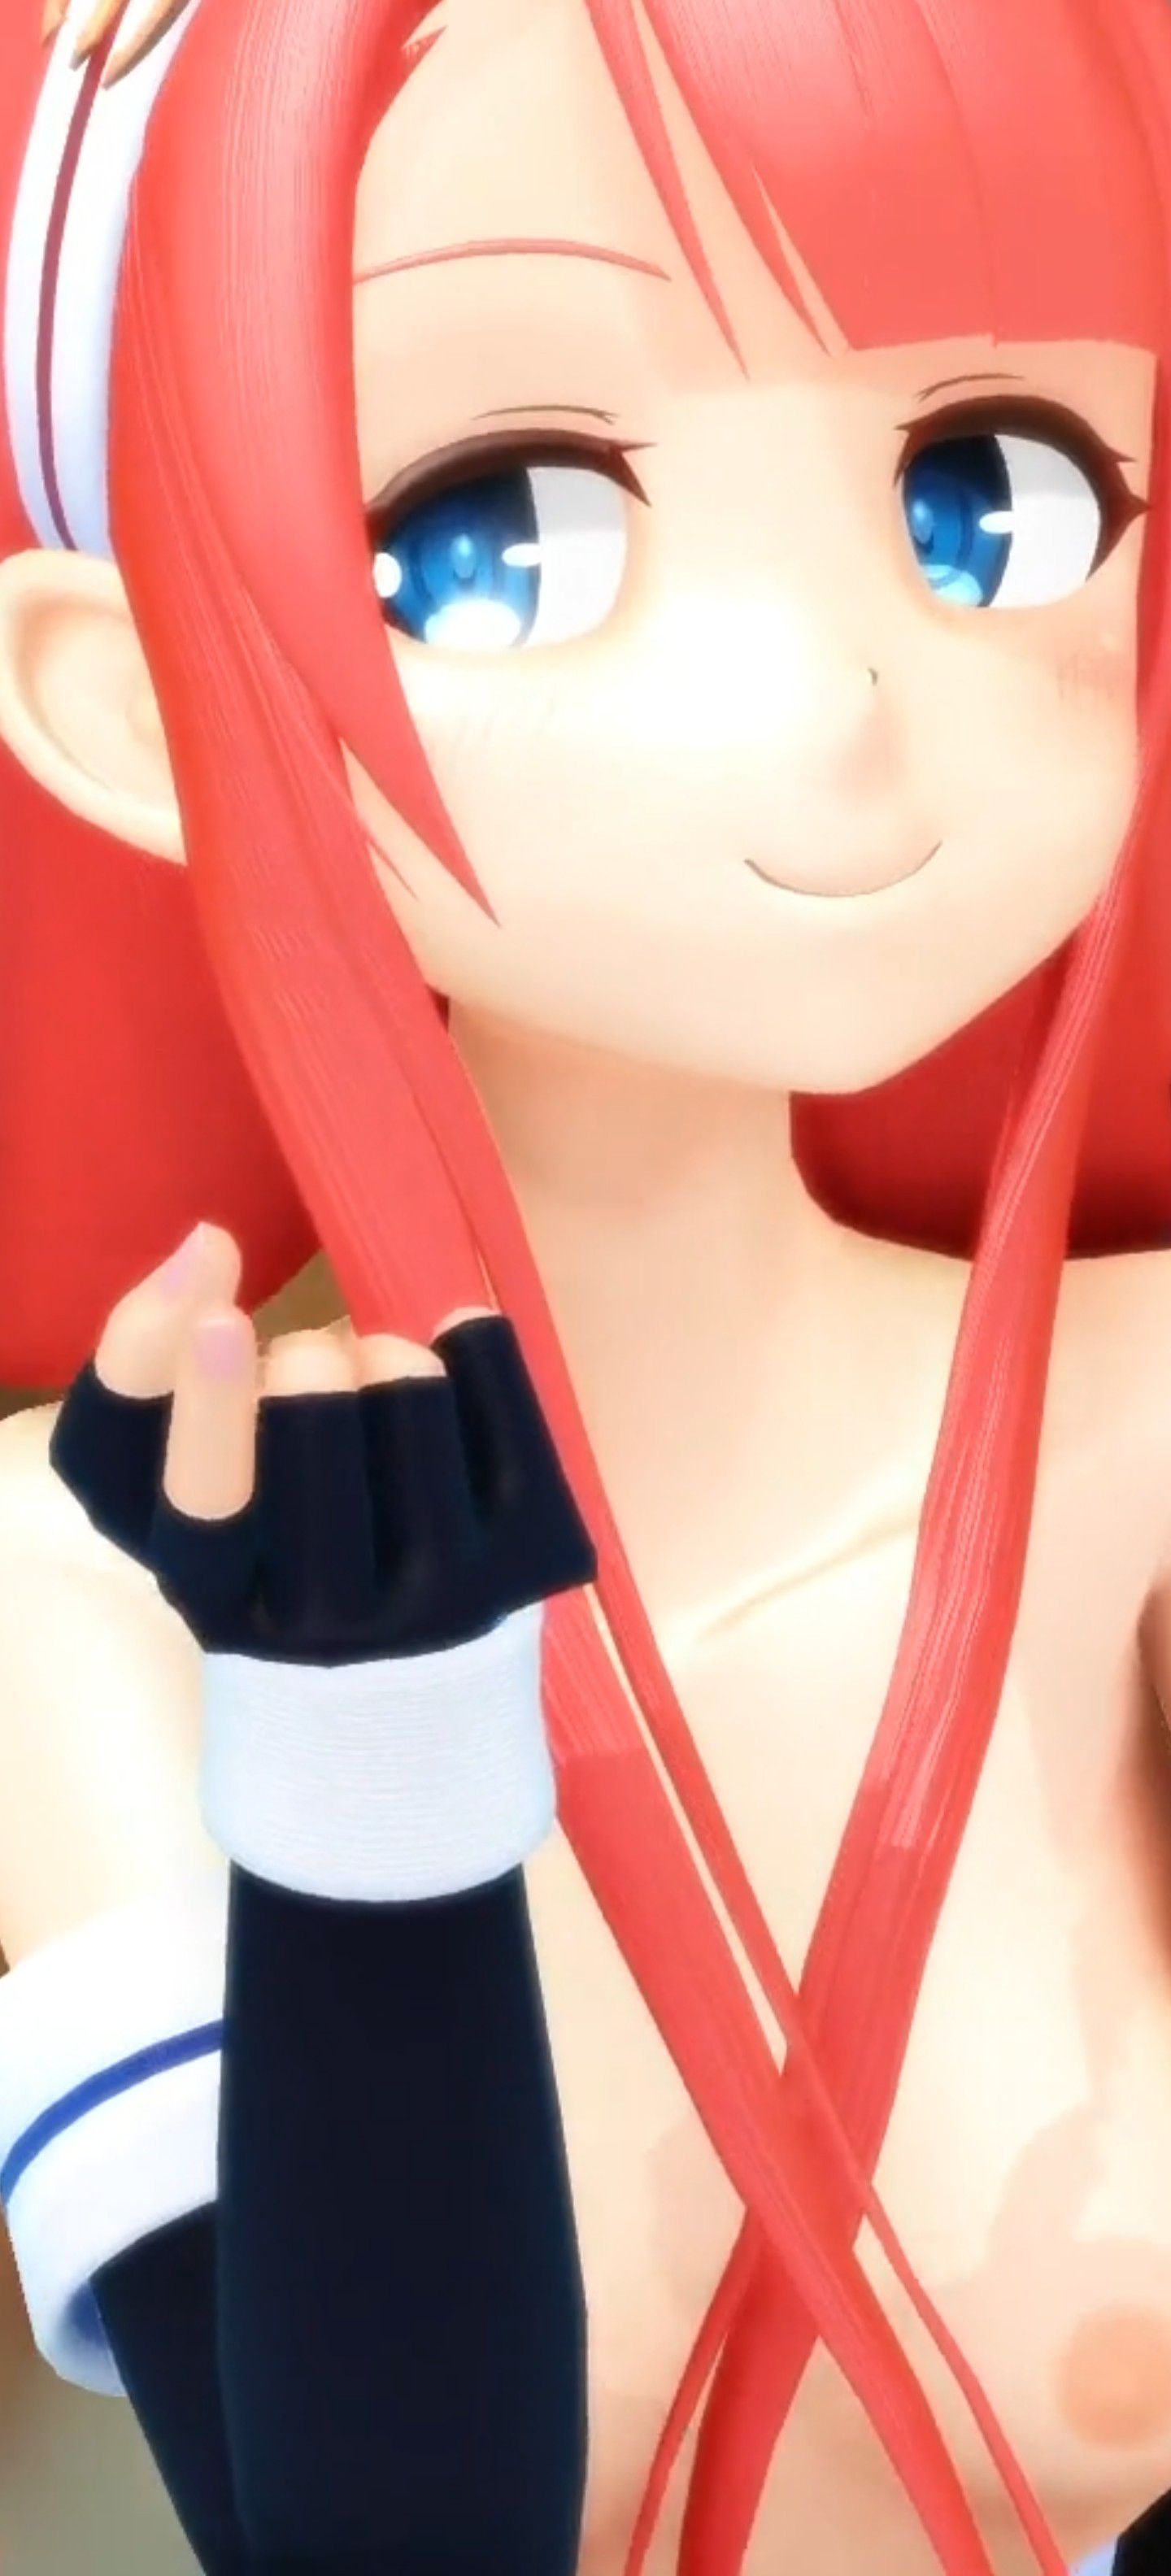 【Good news】Erotic MMD, wwww that pulls out with Gachi 3